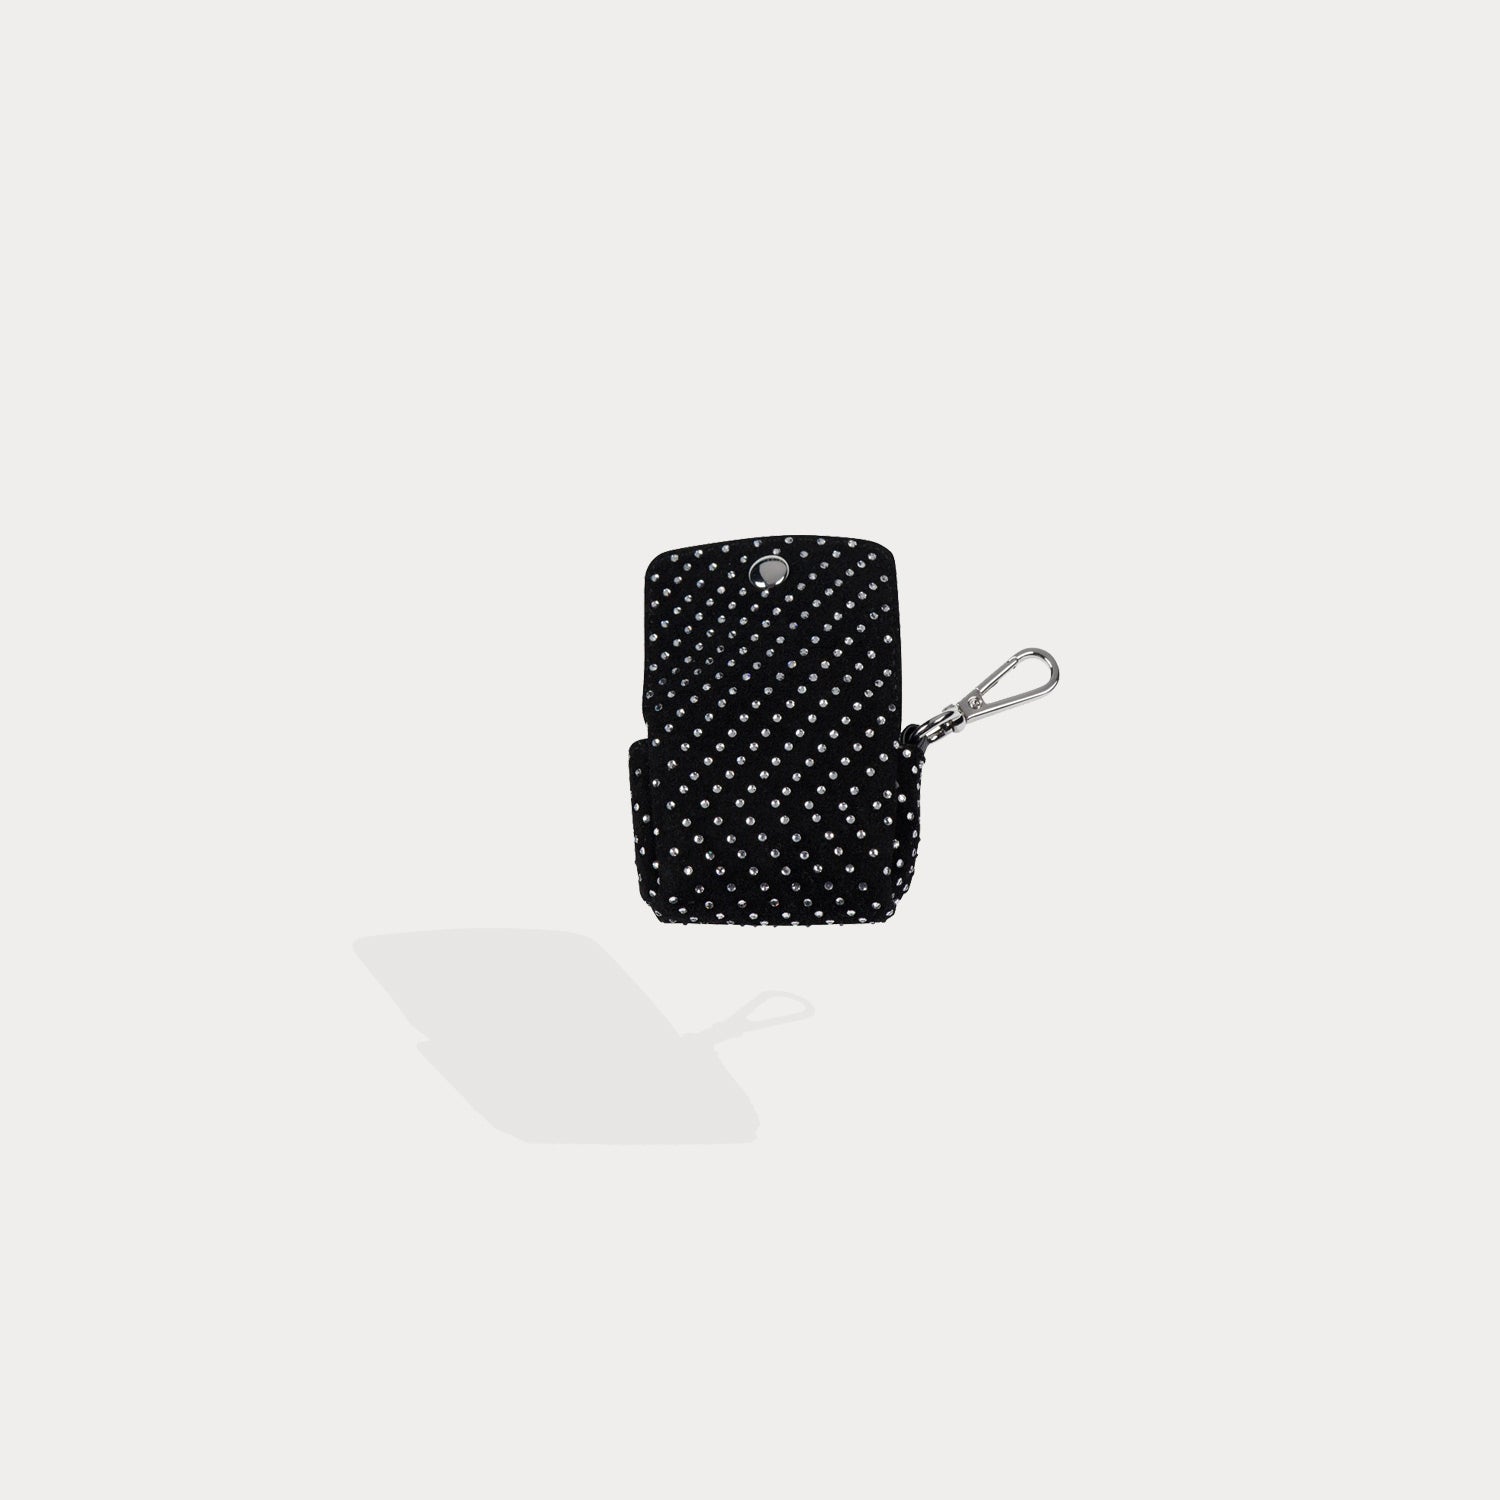 Avery Rhinestone AirPod Clip-On Pouch - Black/Silver Pouch Pouch 